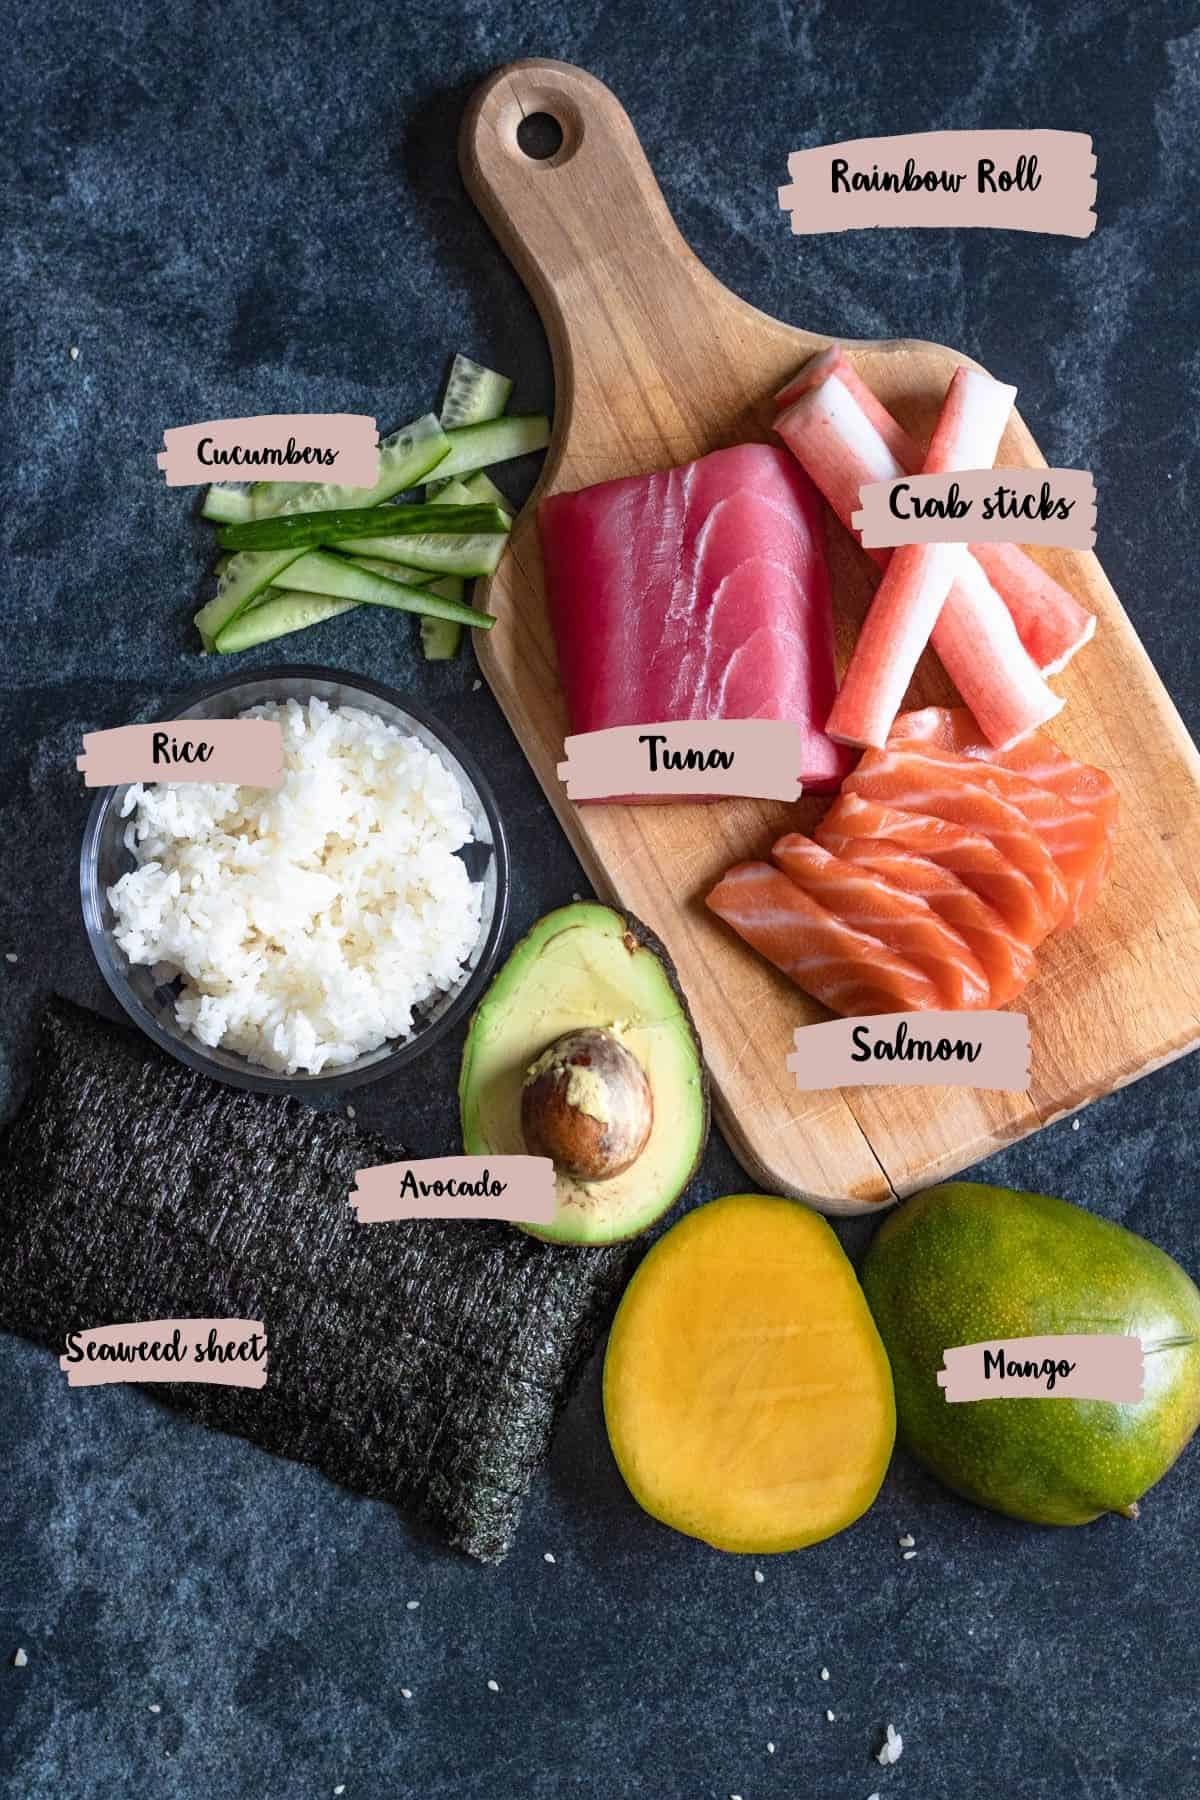 Ingredients needed to prepare a rainbow roll. 